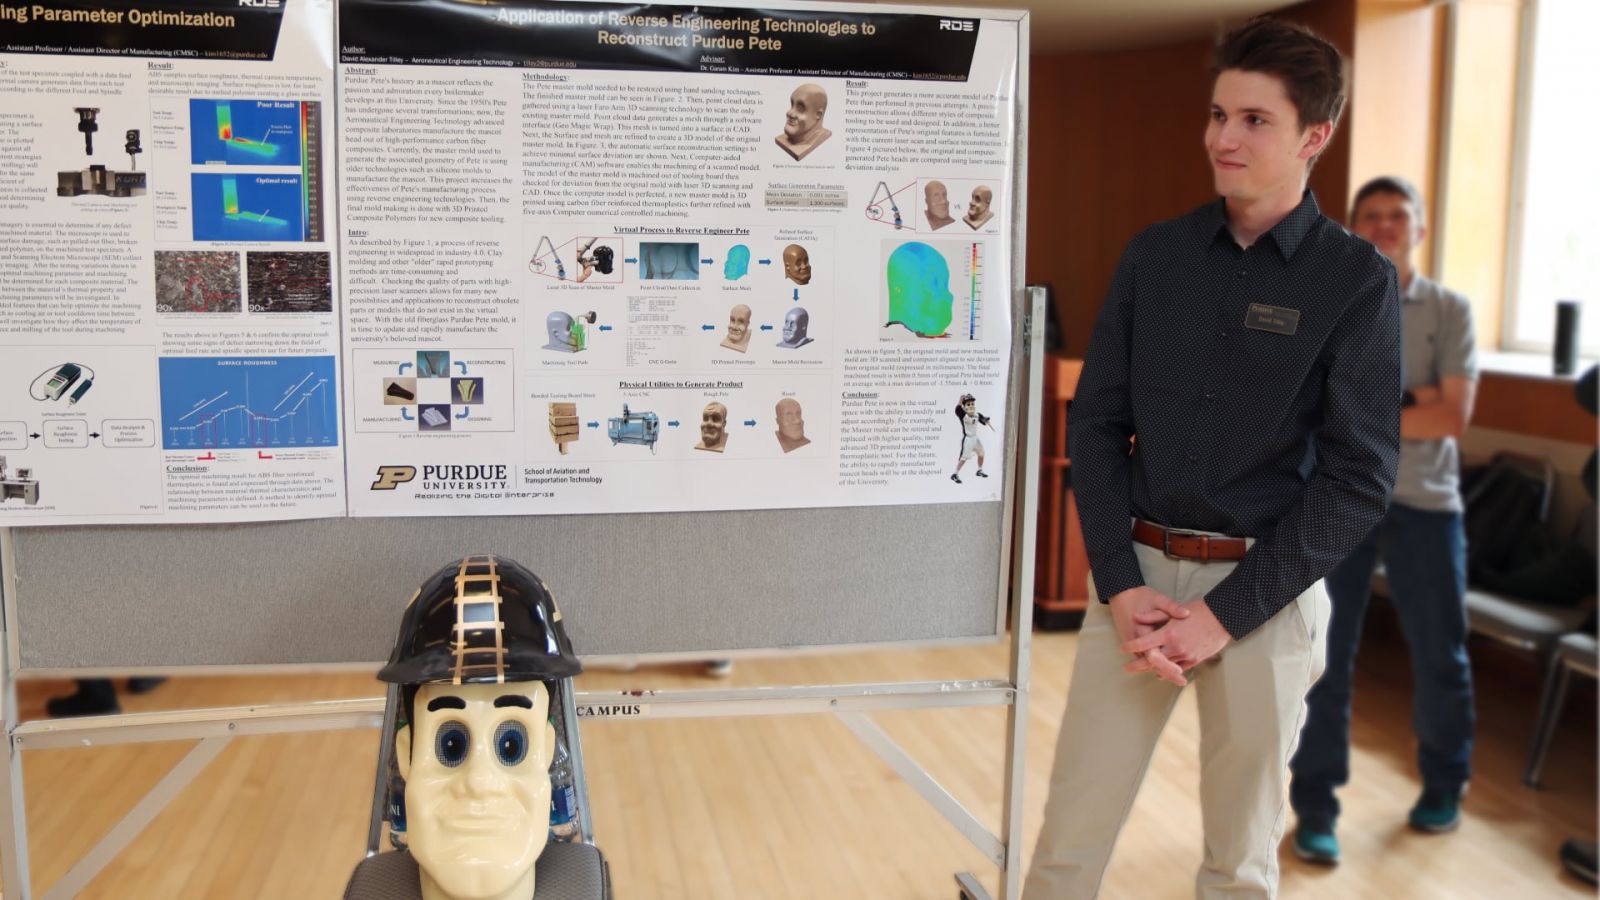 David Tilley, a research assistant studying aeronautical engineering technology, presents "“Application of Reverse Engineering Technologies to Reconstruct Purdue Pete” (Purdue University photo/John O'Malley)